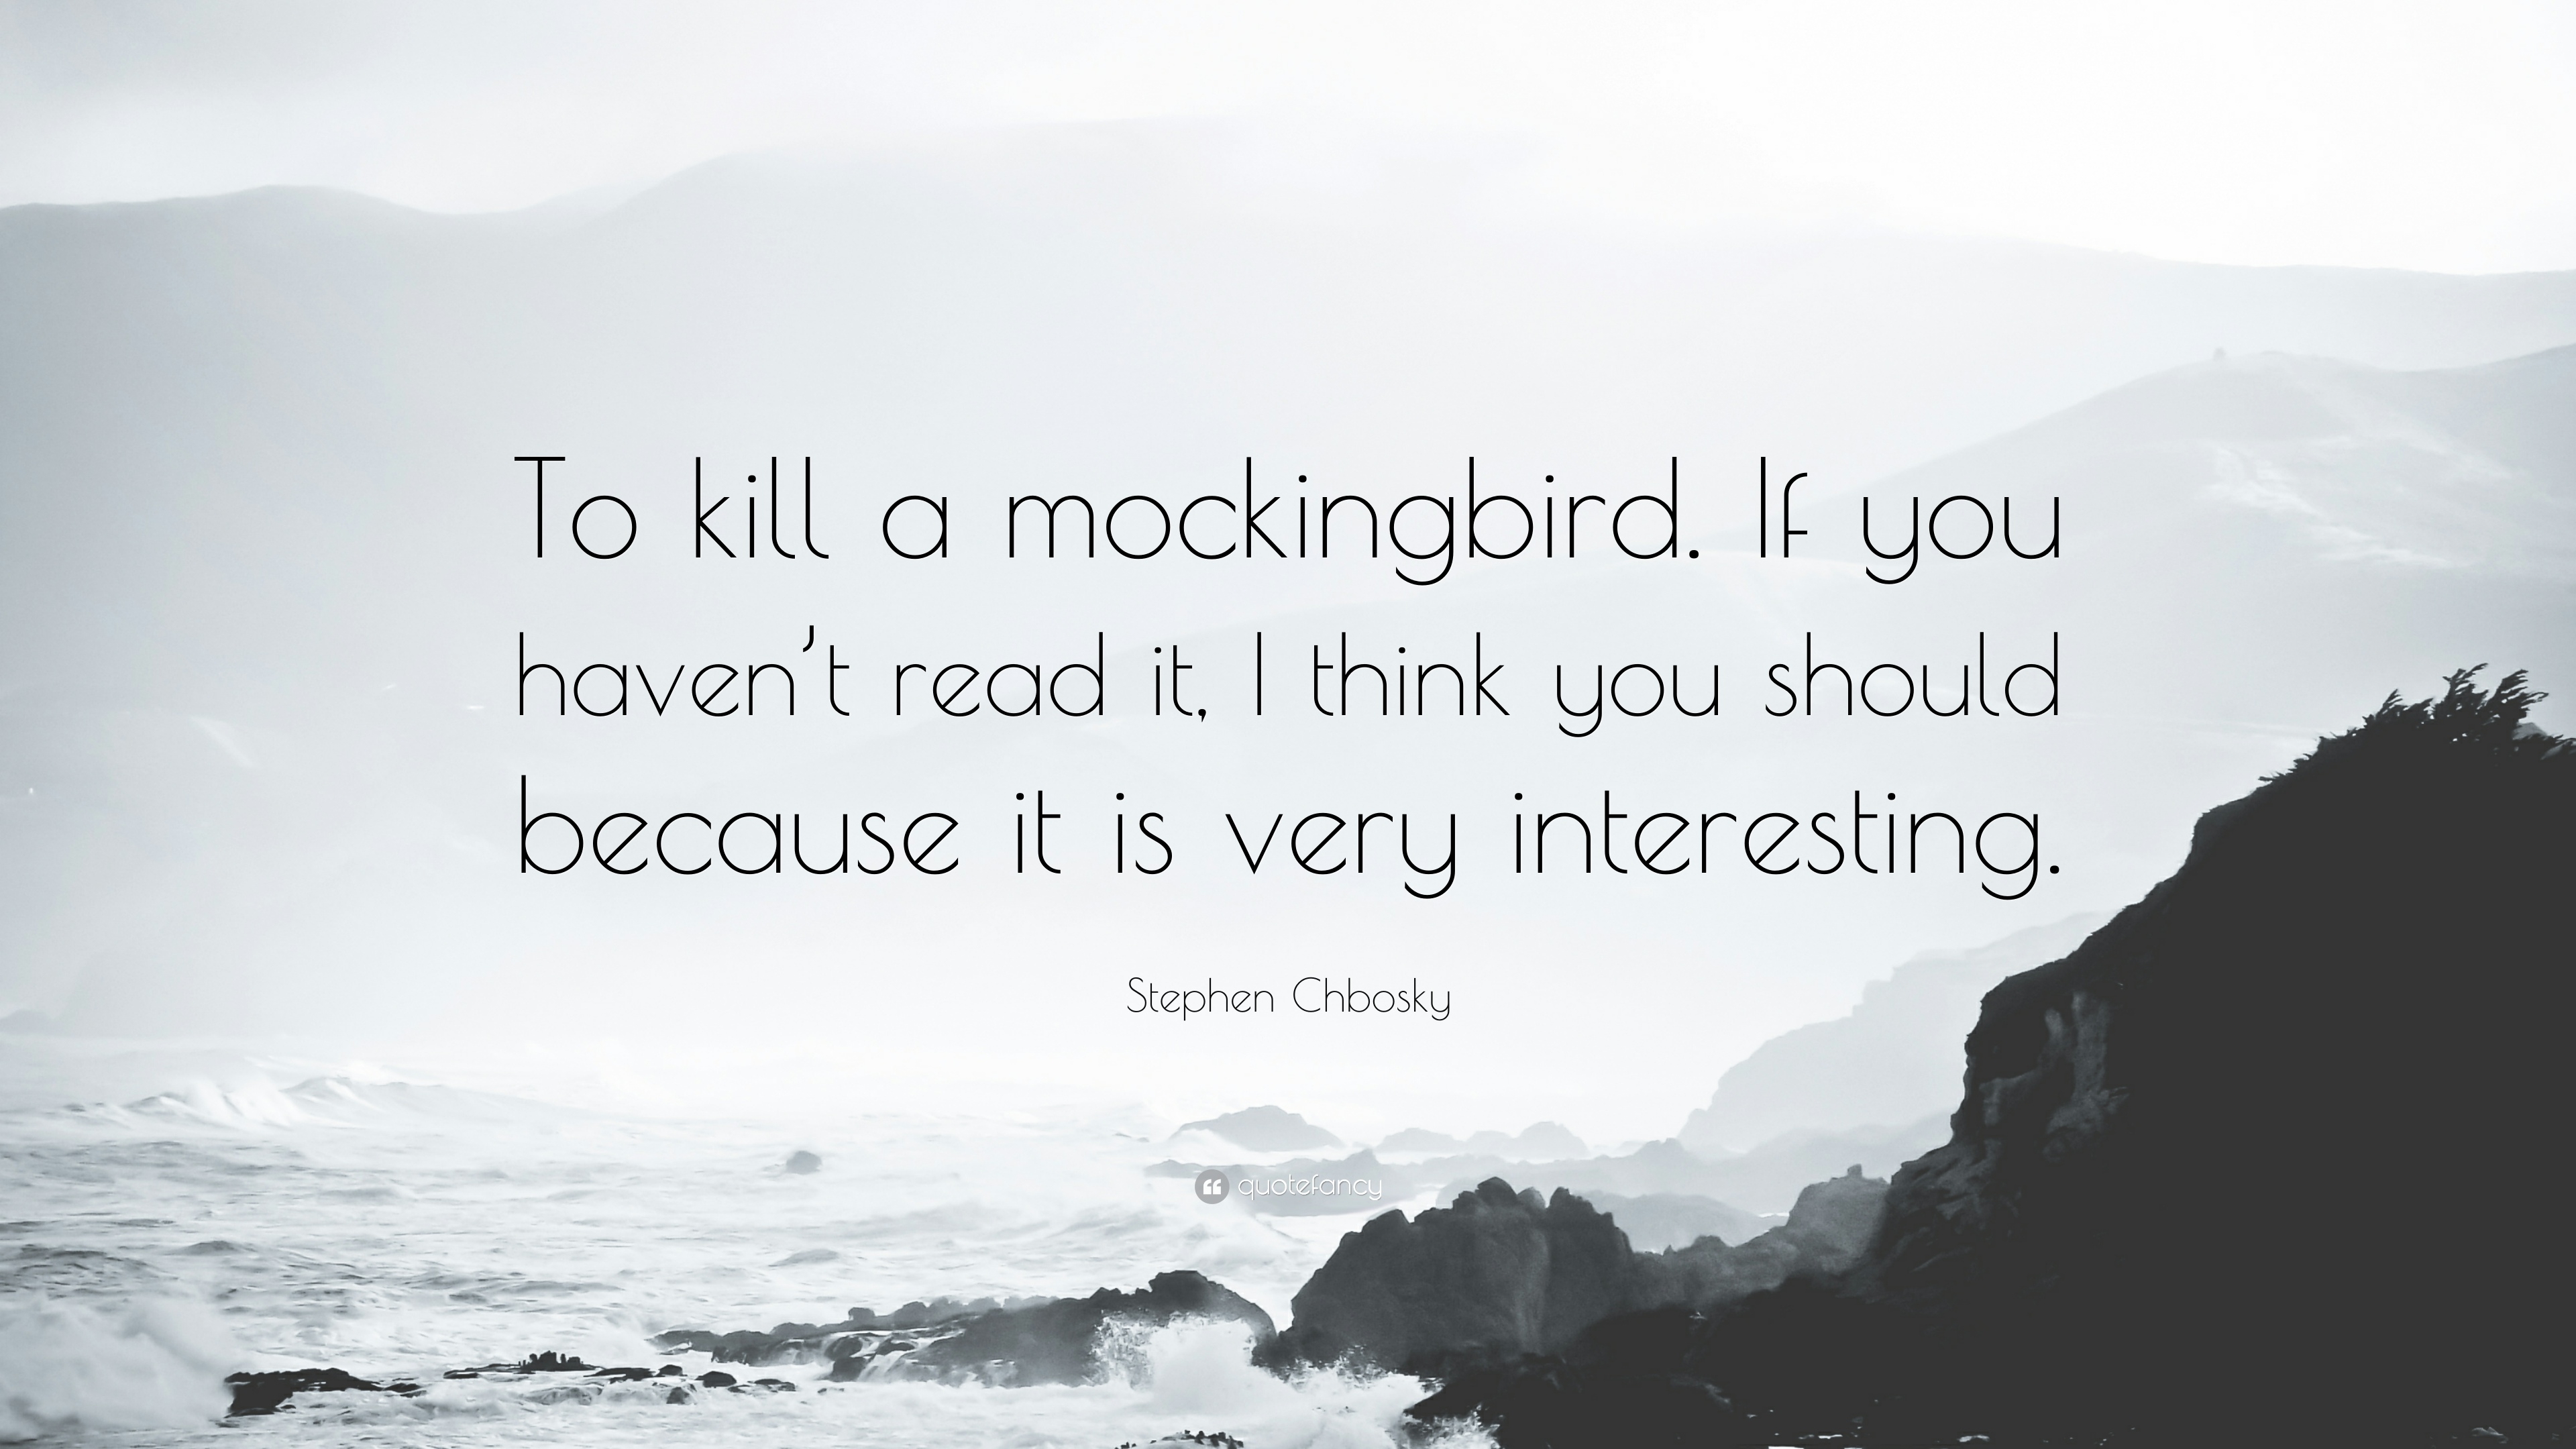 Stephen Chbosky Quote: “To kill a mockingbird. If you haven't read